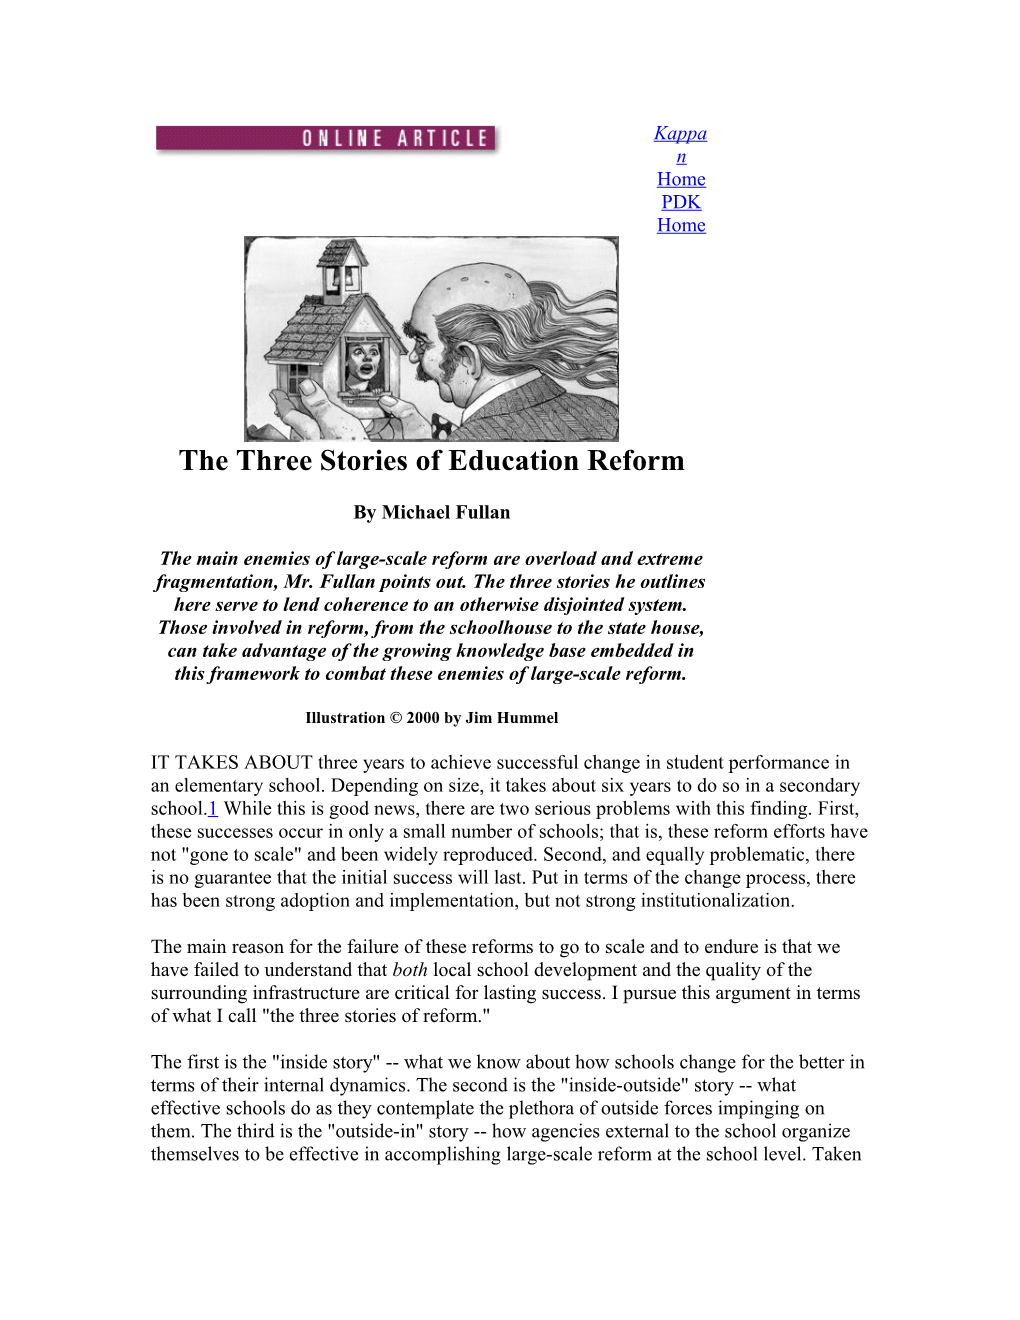 The Three Stories of Education Reform